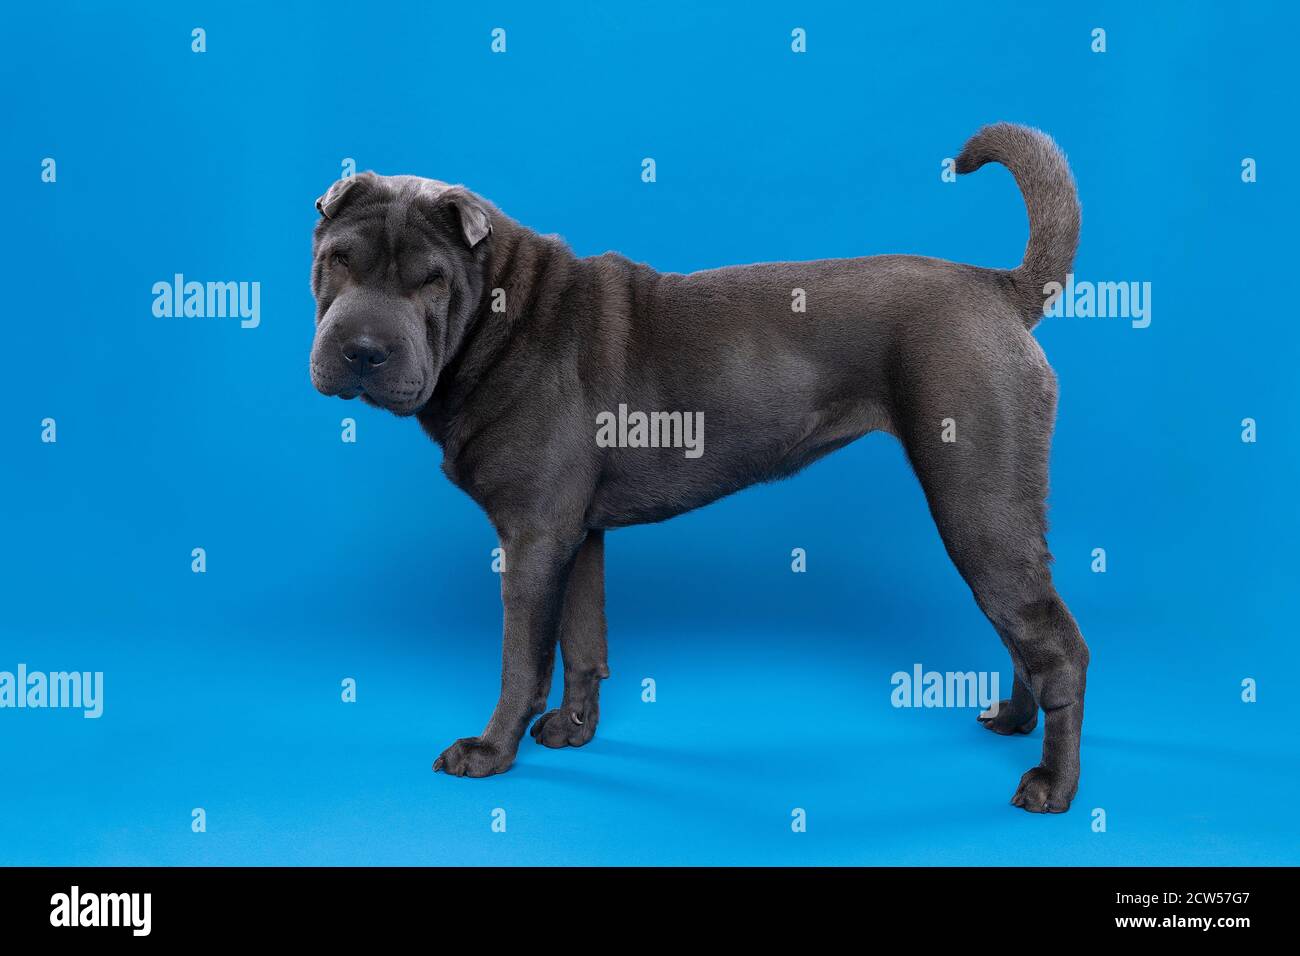 A Standing grey Sharpei dog looking at the camera isolated on a blue background Stock Photo